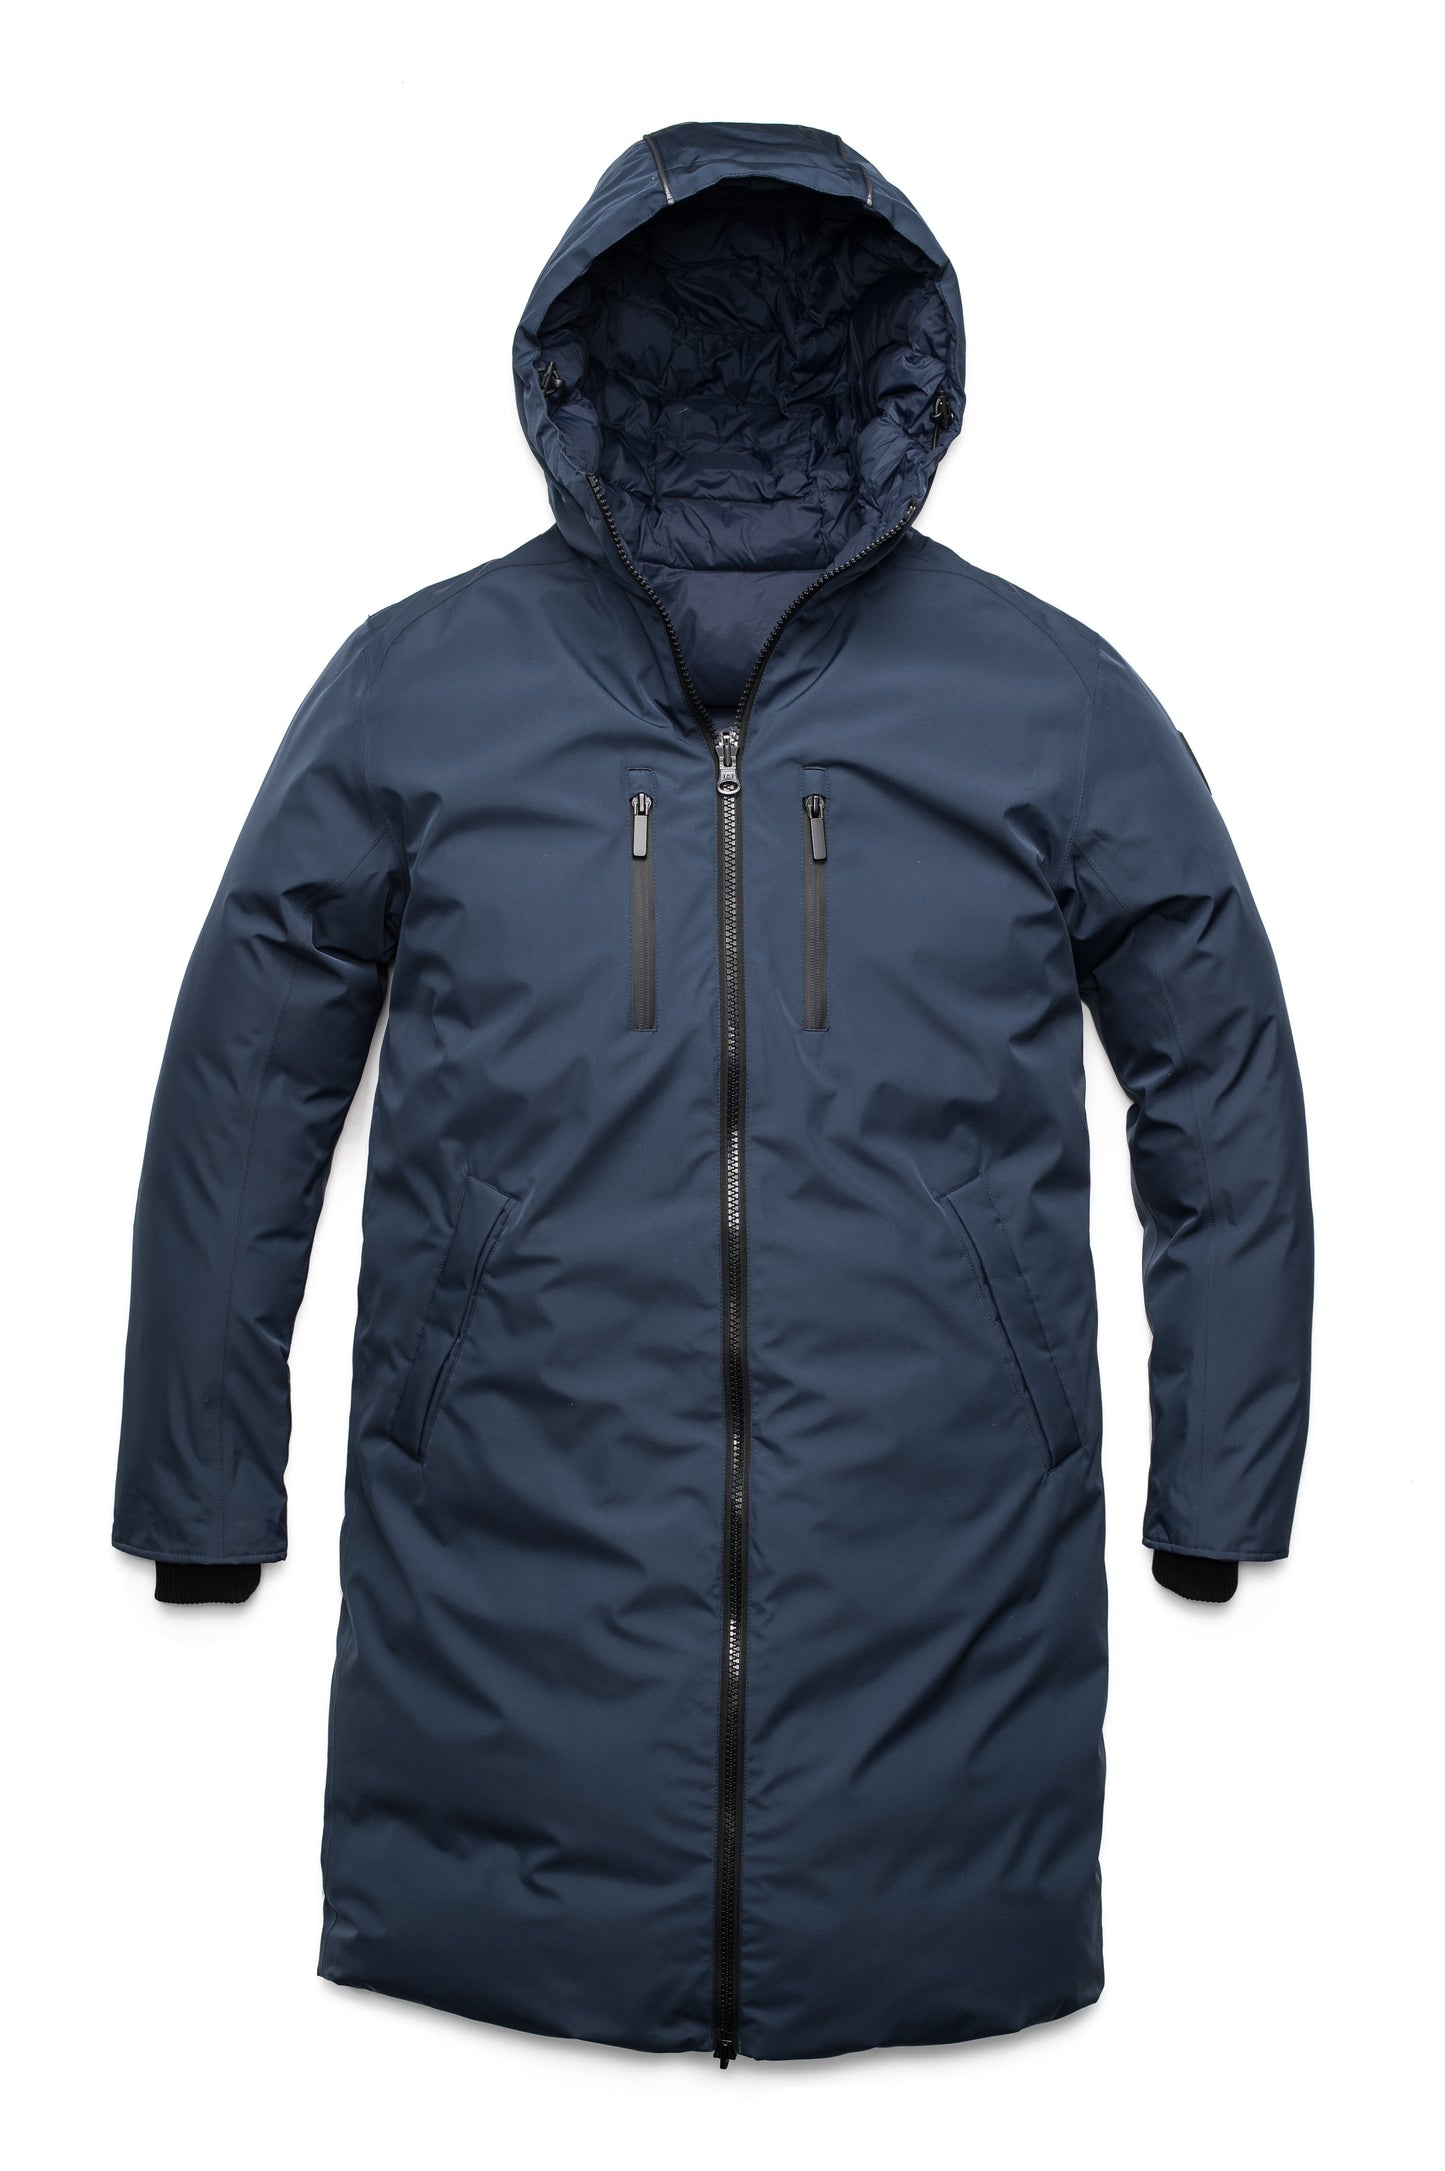 Men's knee length reversible down-filled parka with non-removable hood in Marine